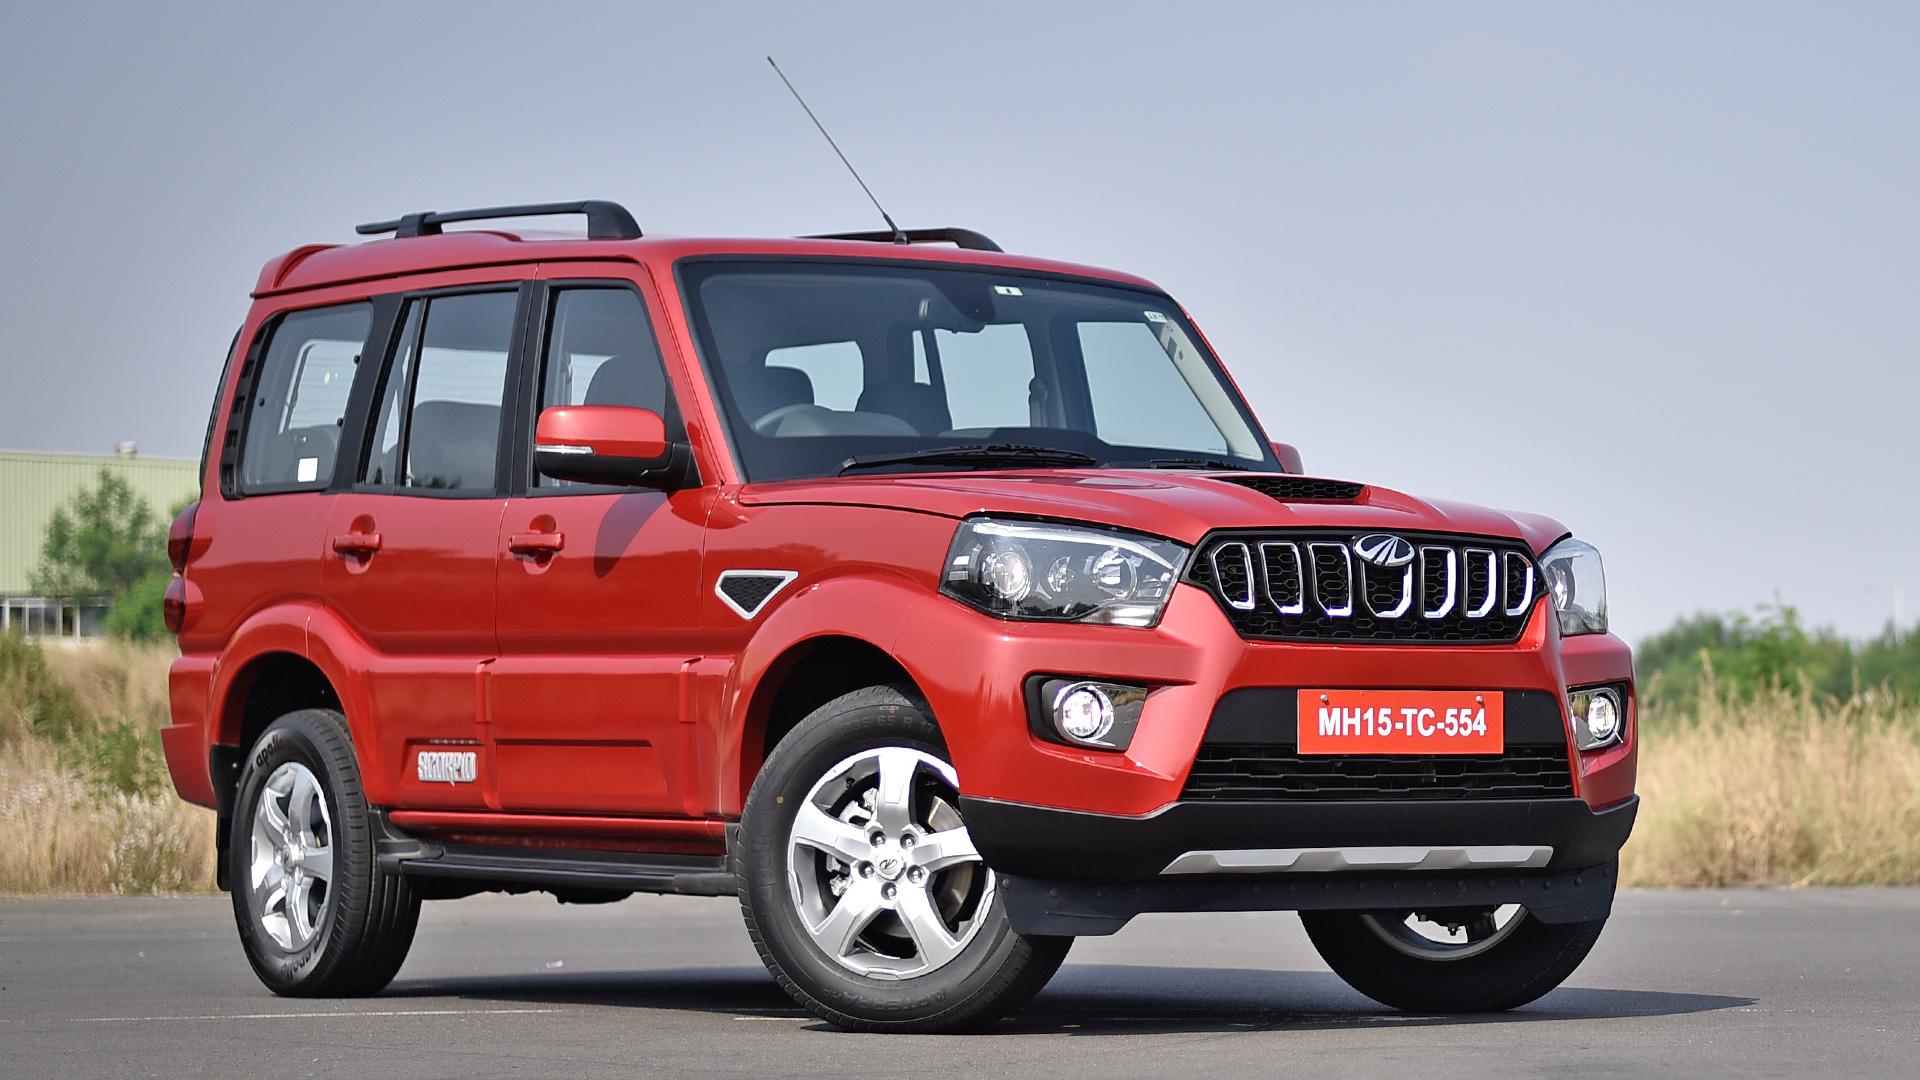 Check out here Mahindra Scorpio Images, Pictures & HD Wallpapers which is  the new generation SUV in India which is com… | Scorpio images, Scorpio  car, Black scorpio